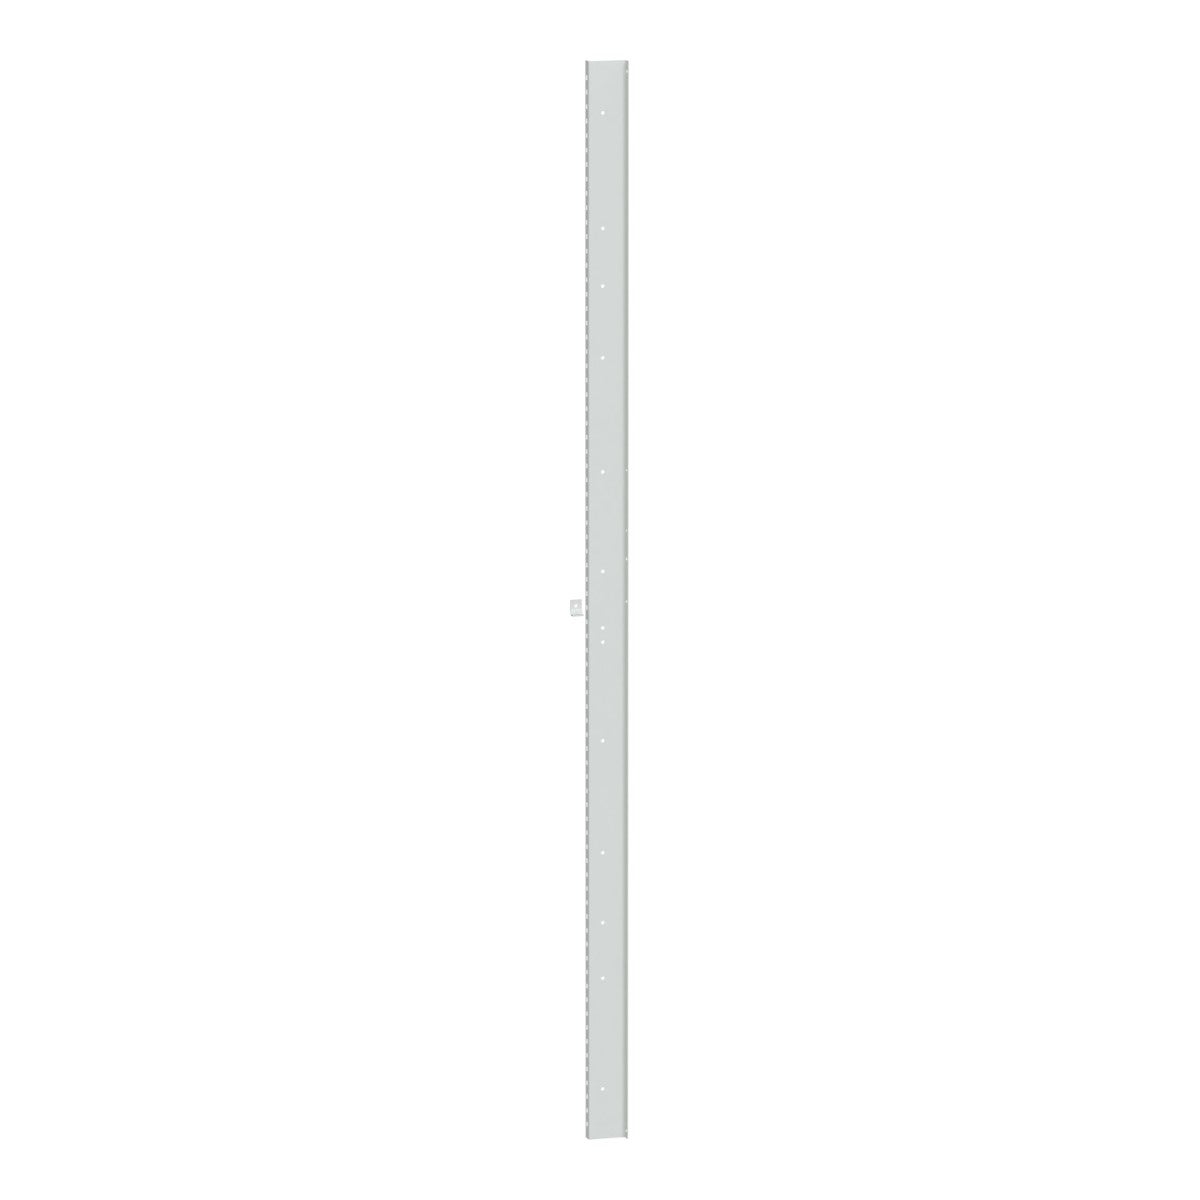 Standard upright, PrismaSeT 6300, 2 Lateral Uprights, for Floor-standing enclosure W1200mm, white, RAL 9001